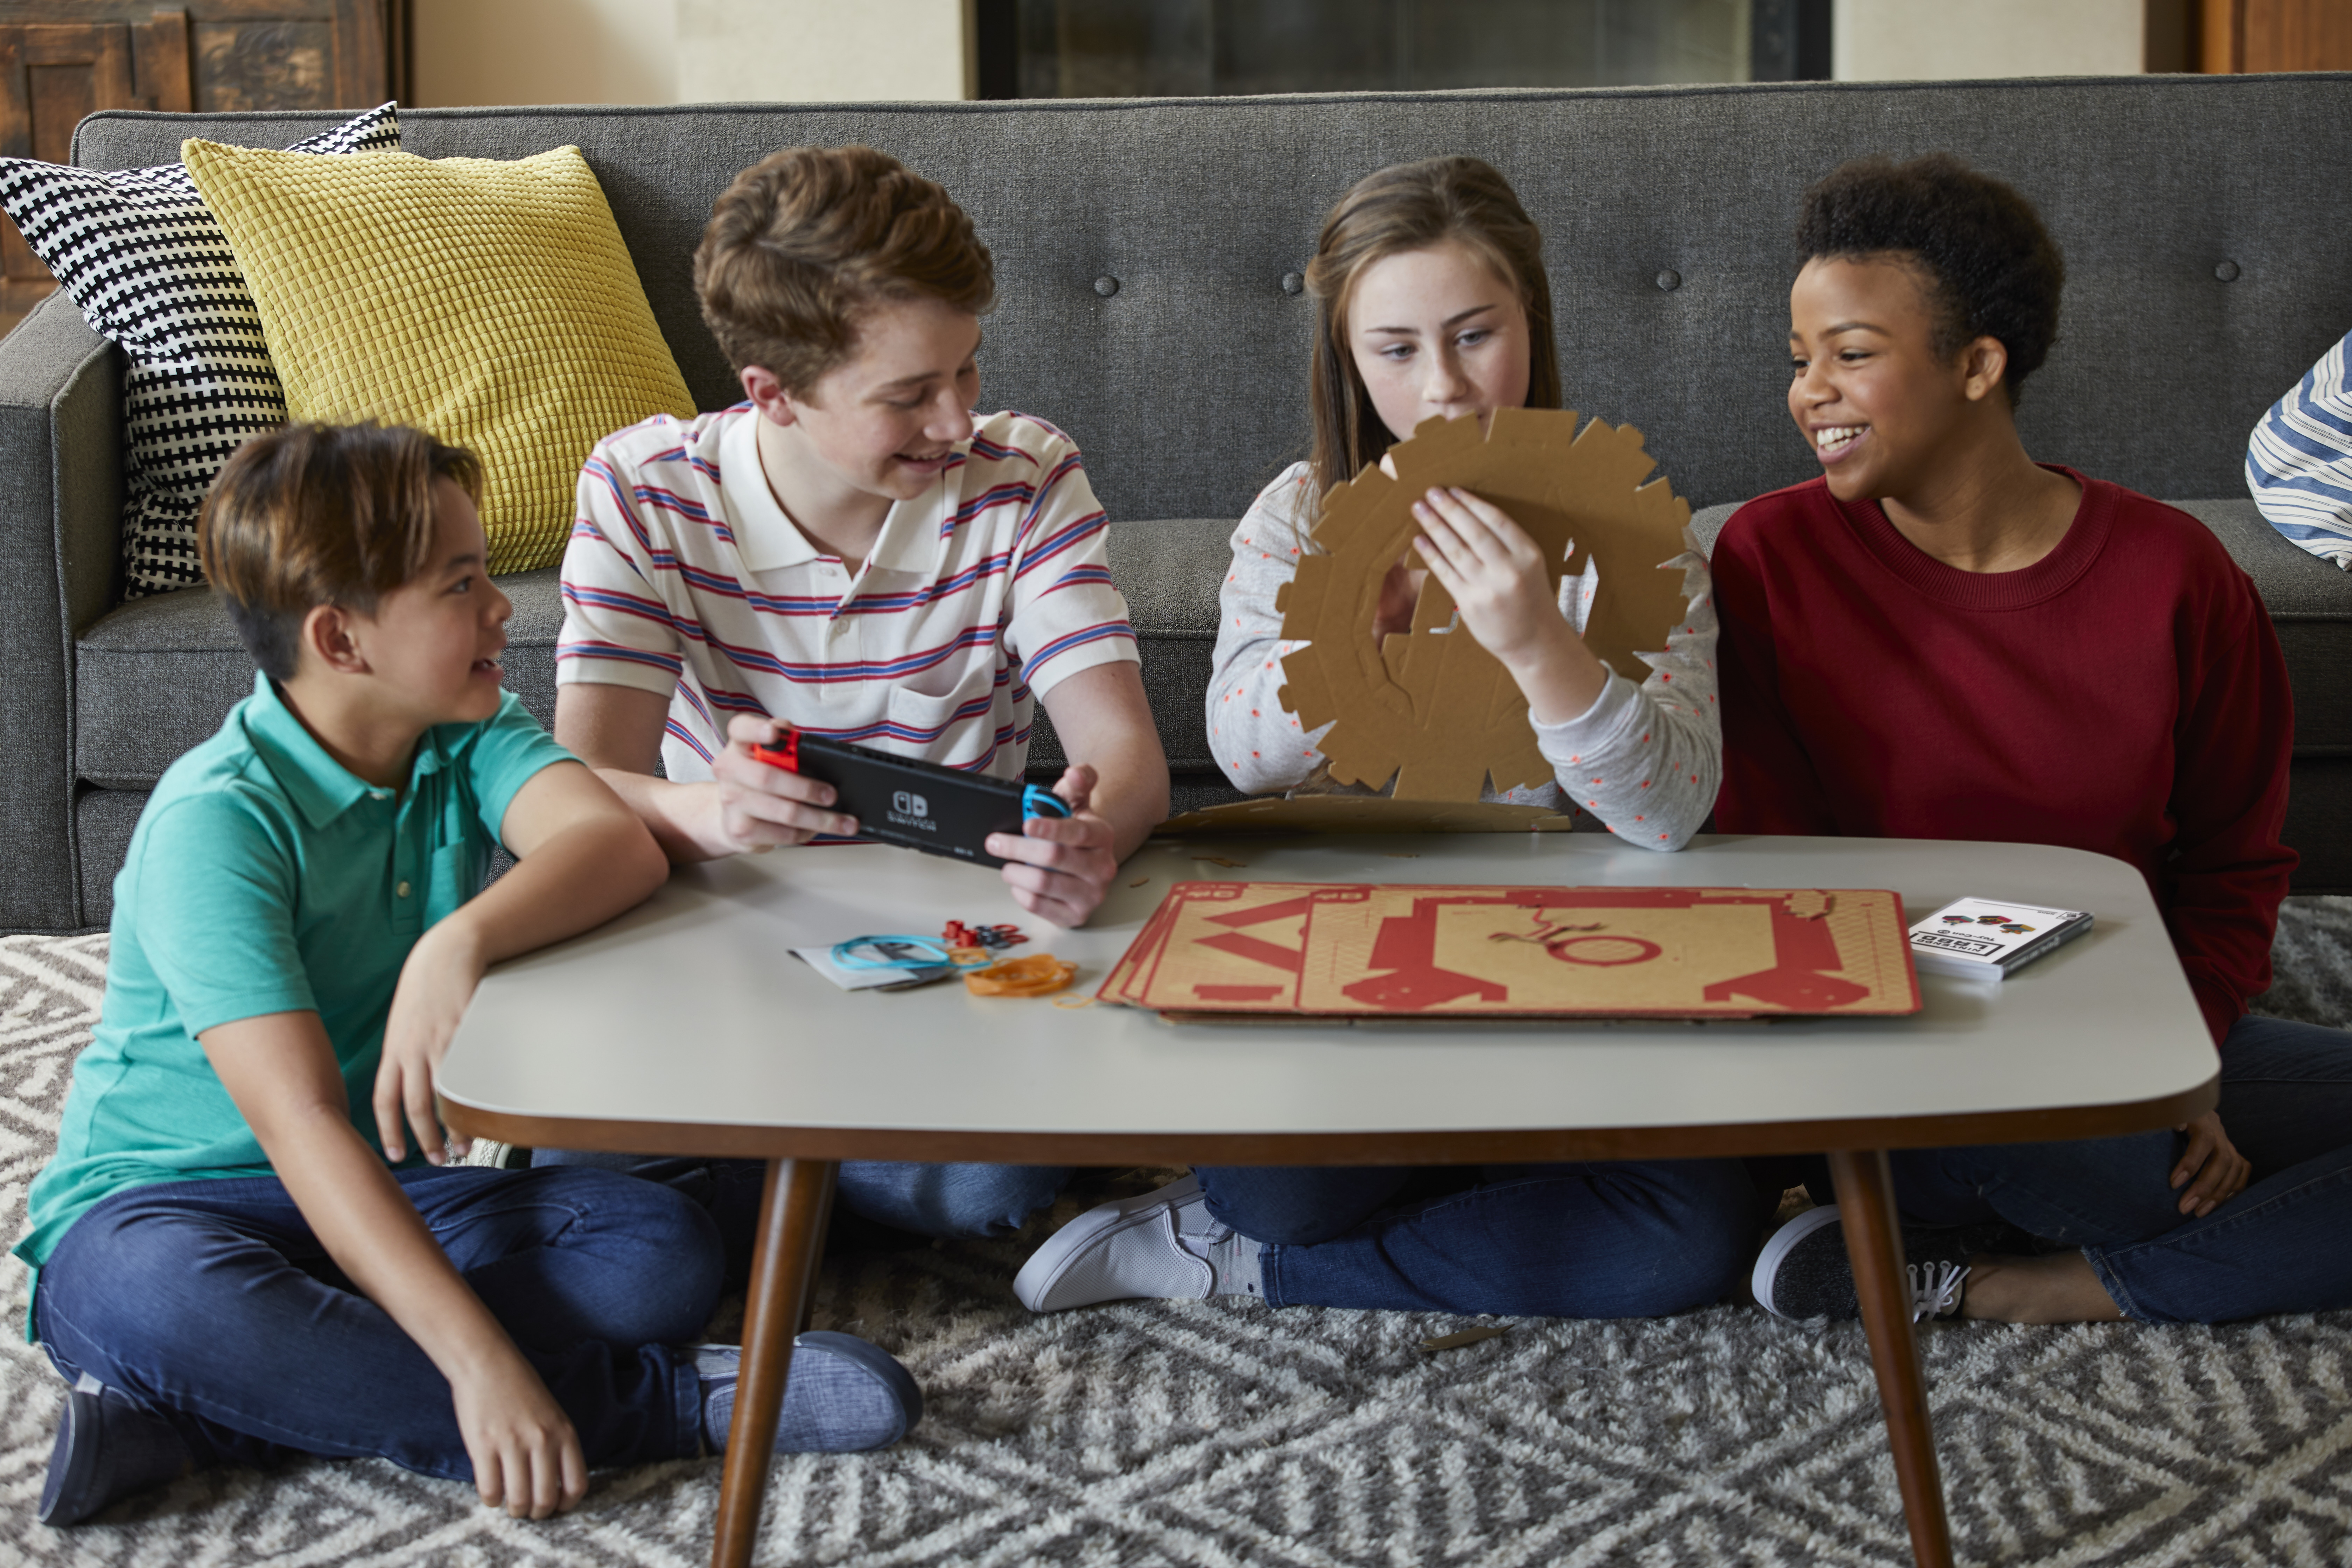 Drive, Dive and Fly with the New Nintendo Labo Vehicle Kit